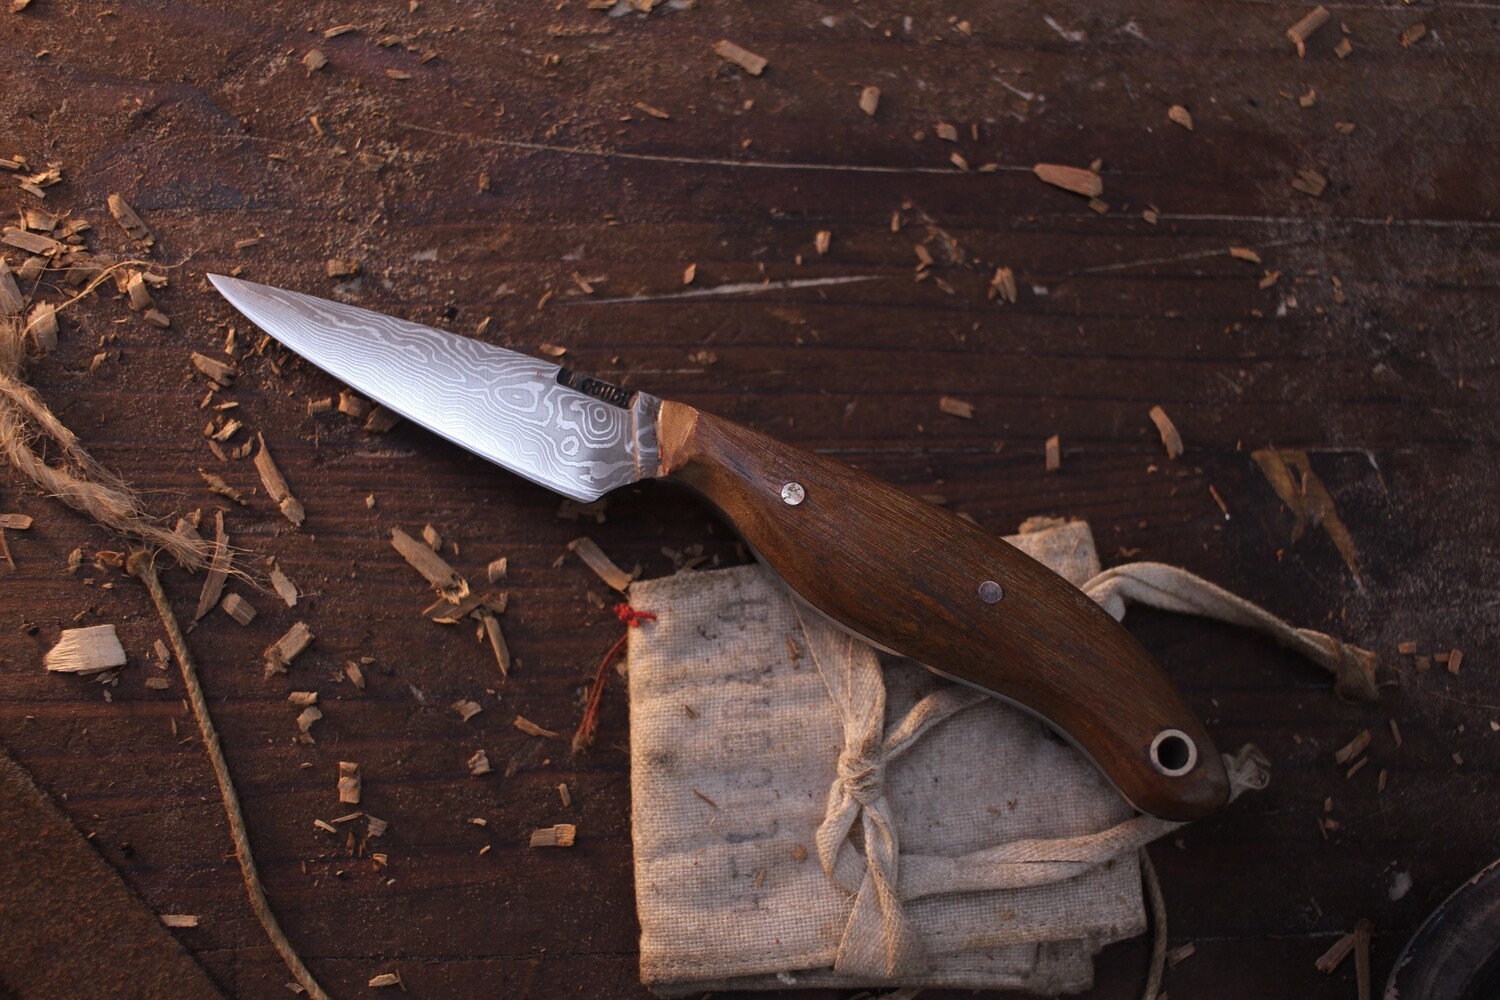 Mark Couch 2.75” Capper / Walnut / Alaskan Forged Damascus